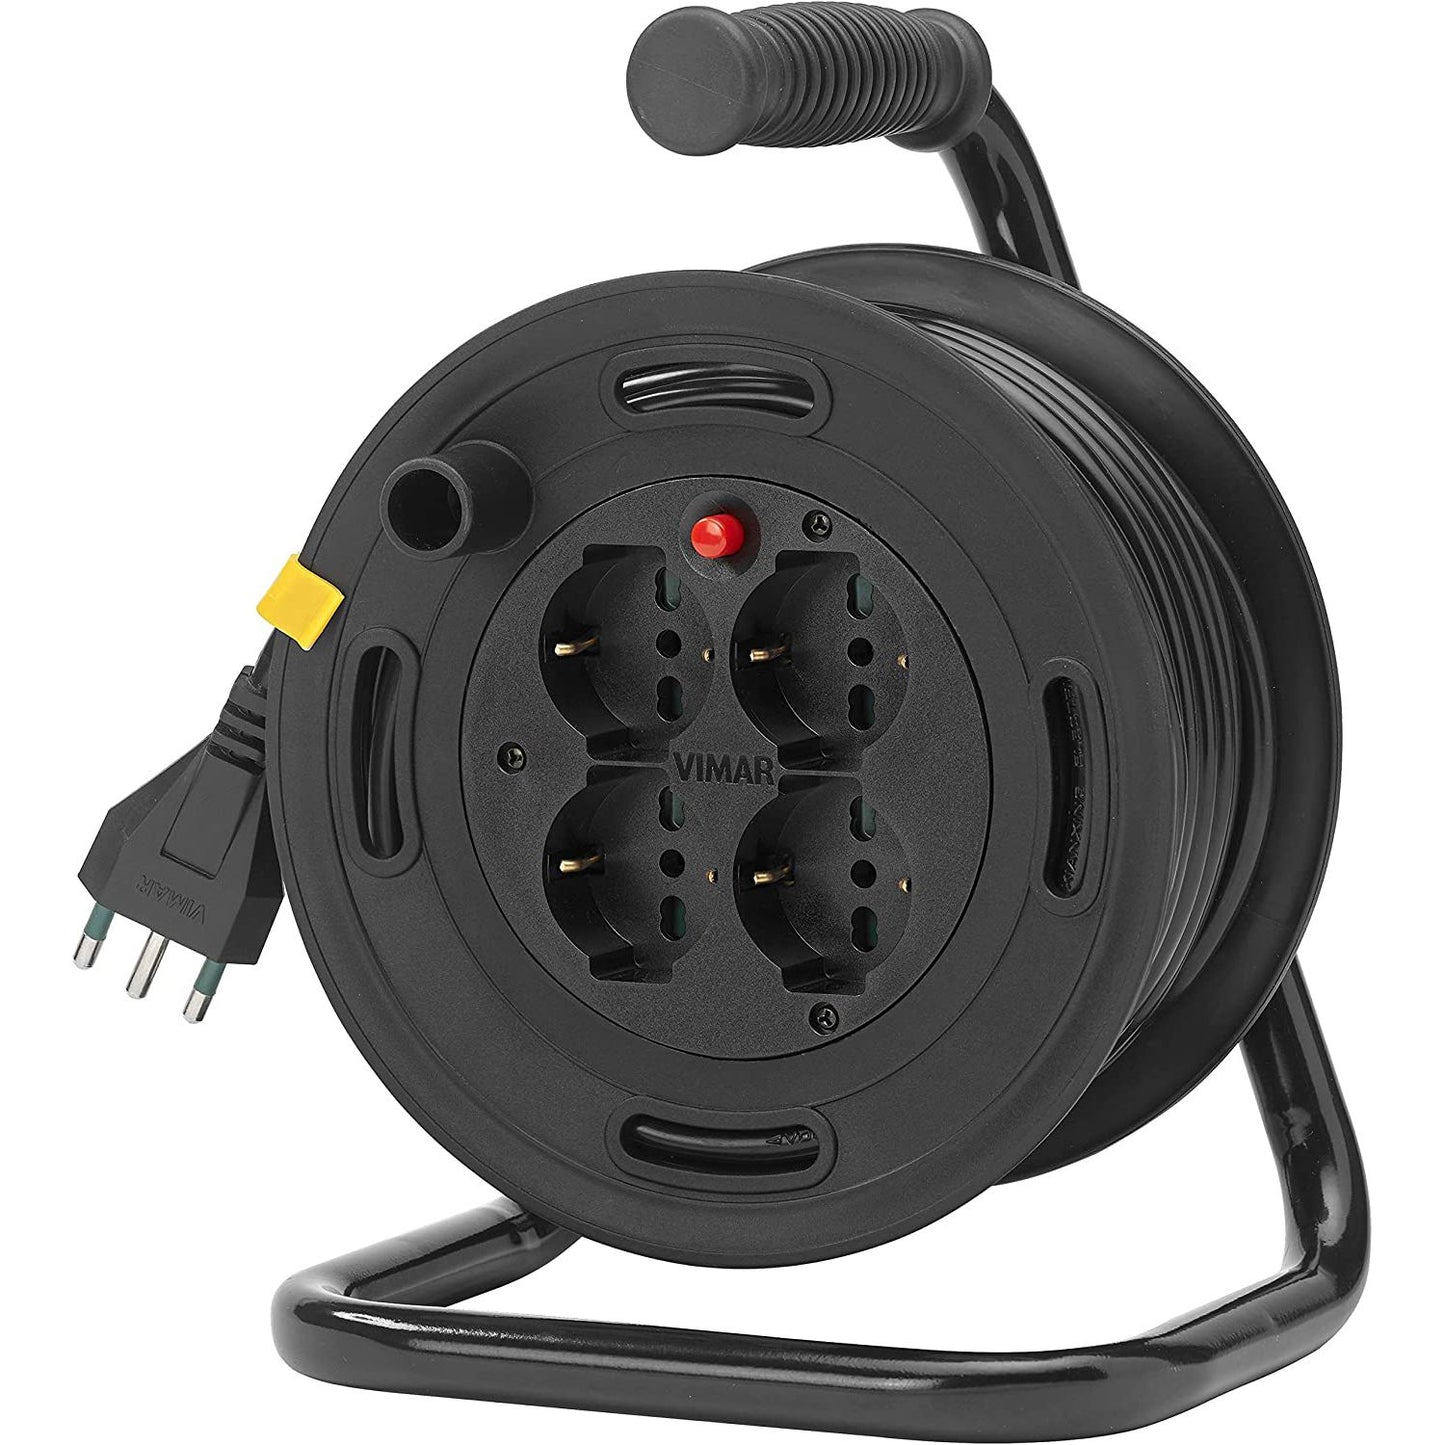 VIMAR Cable reel 16A 230V, with S17 2P+T plug and 4 P40 type universal sockets, 15m long cable, thermal circuit breaker for protection against overload